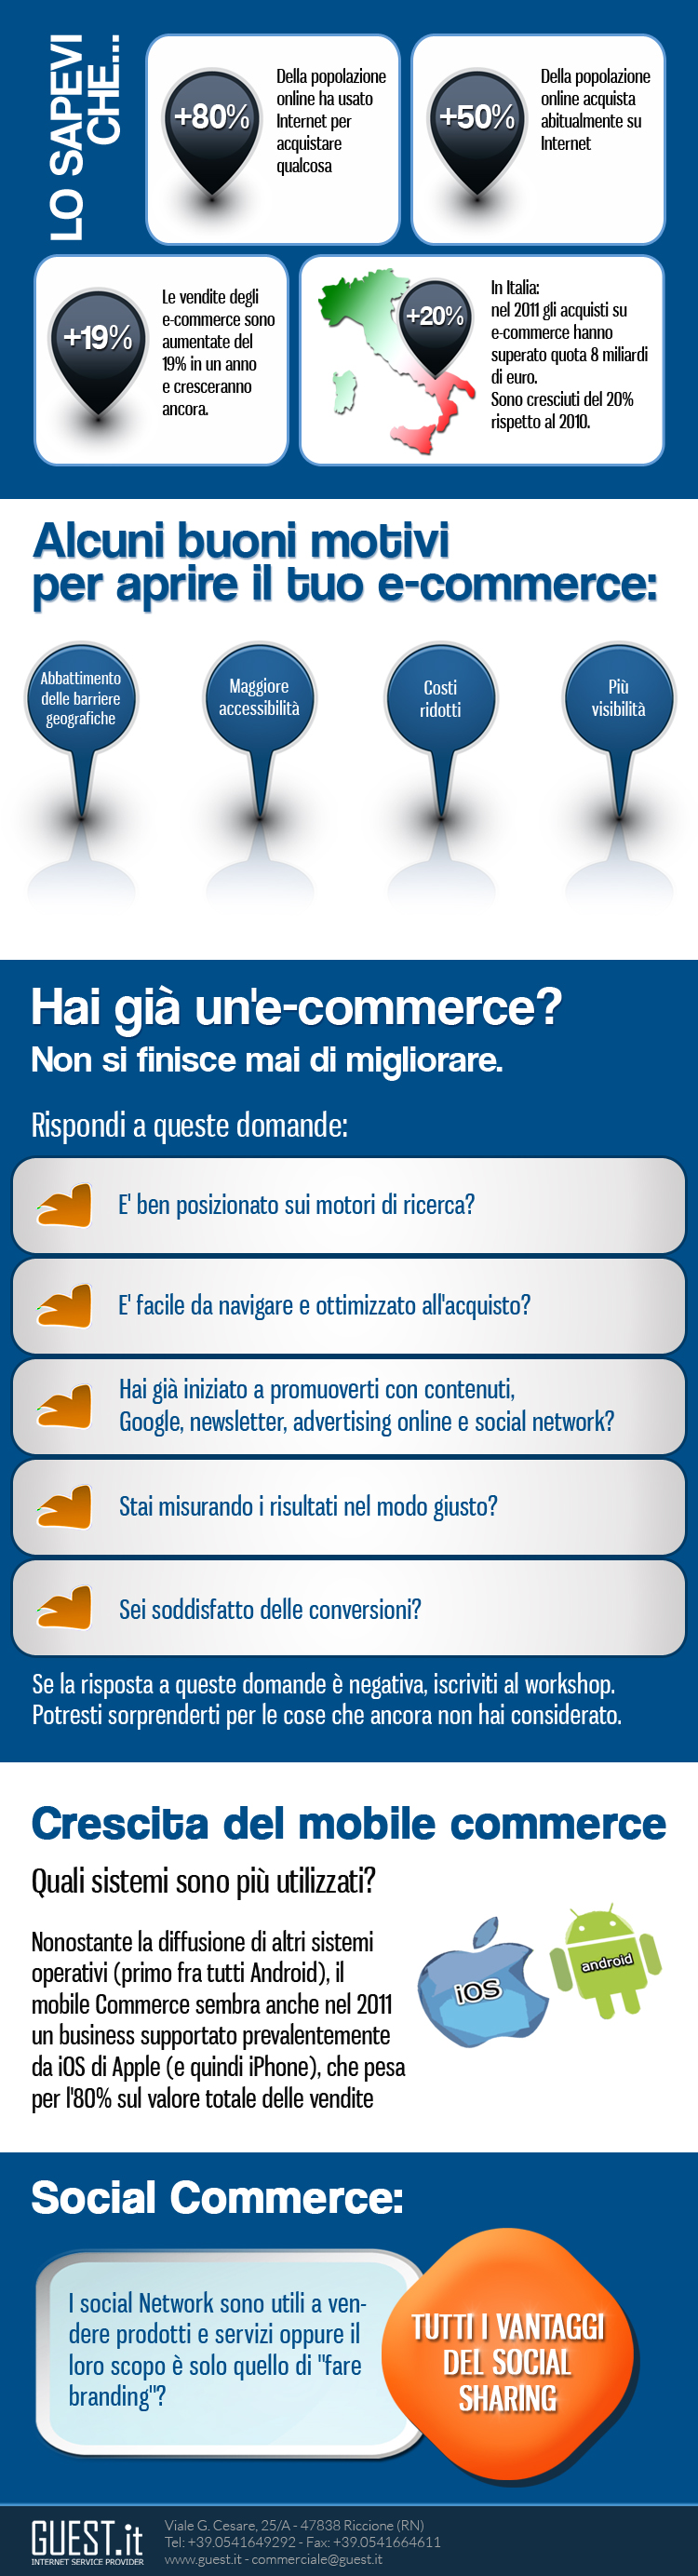 http://www.guest.it/workshop-ecommerce.php